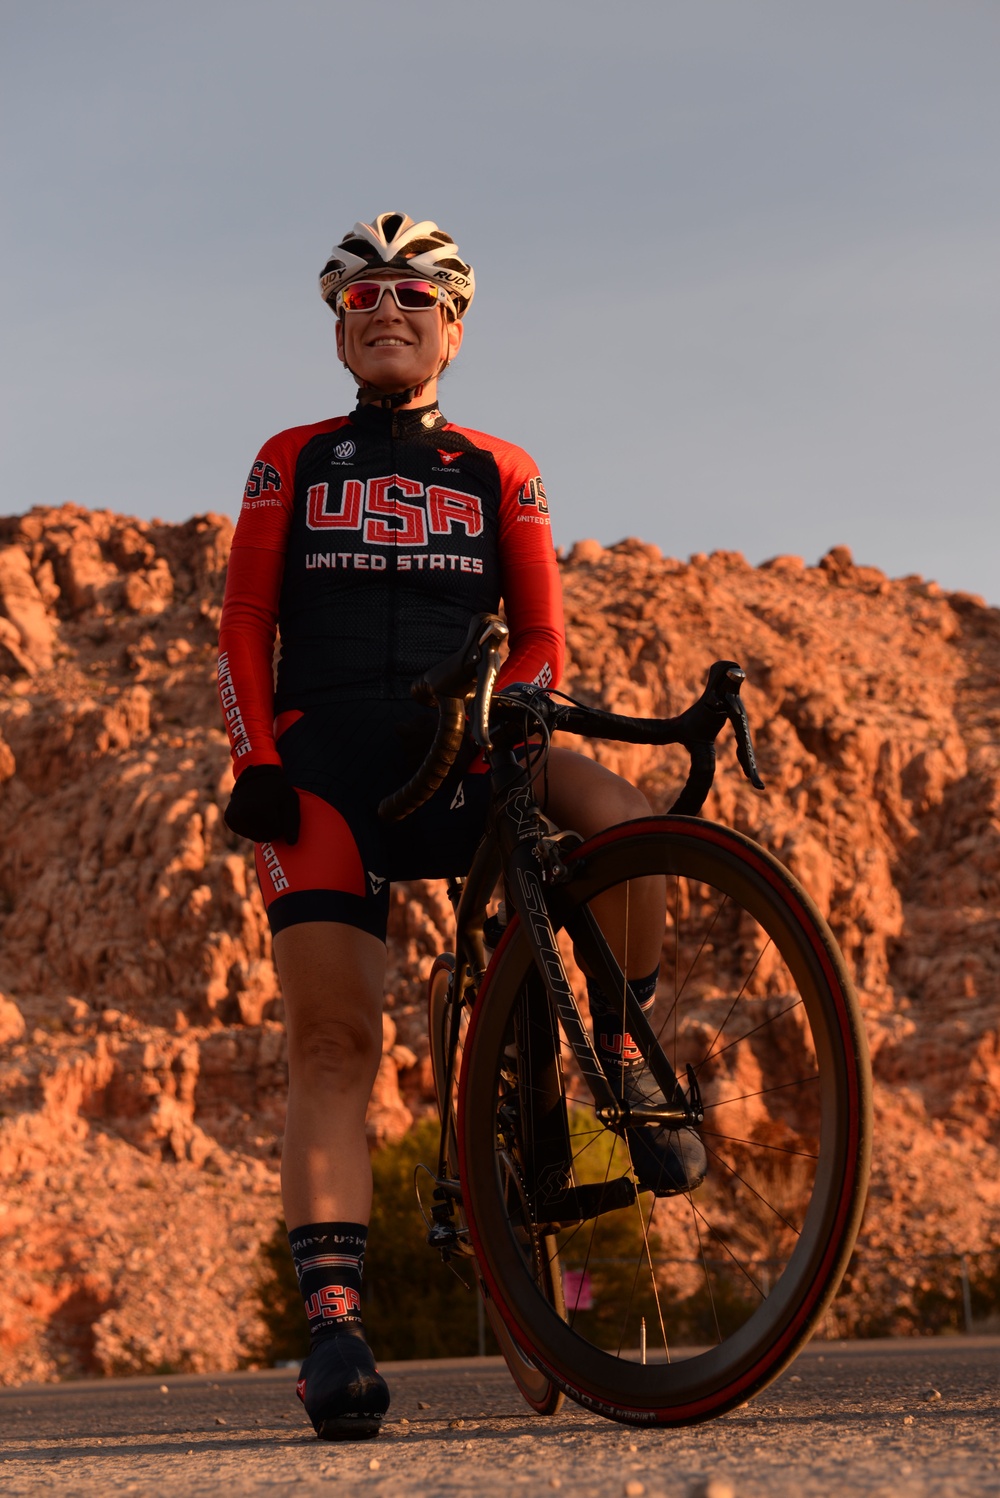 NAFB cyclist participates in Military World Games